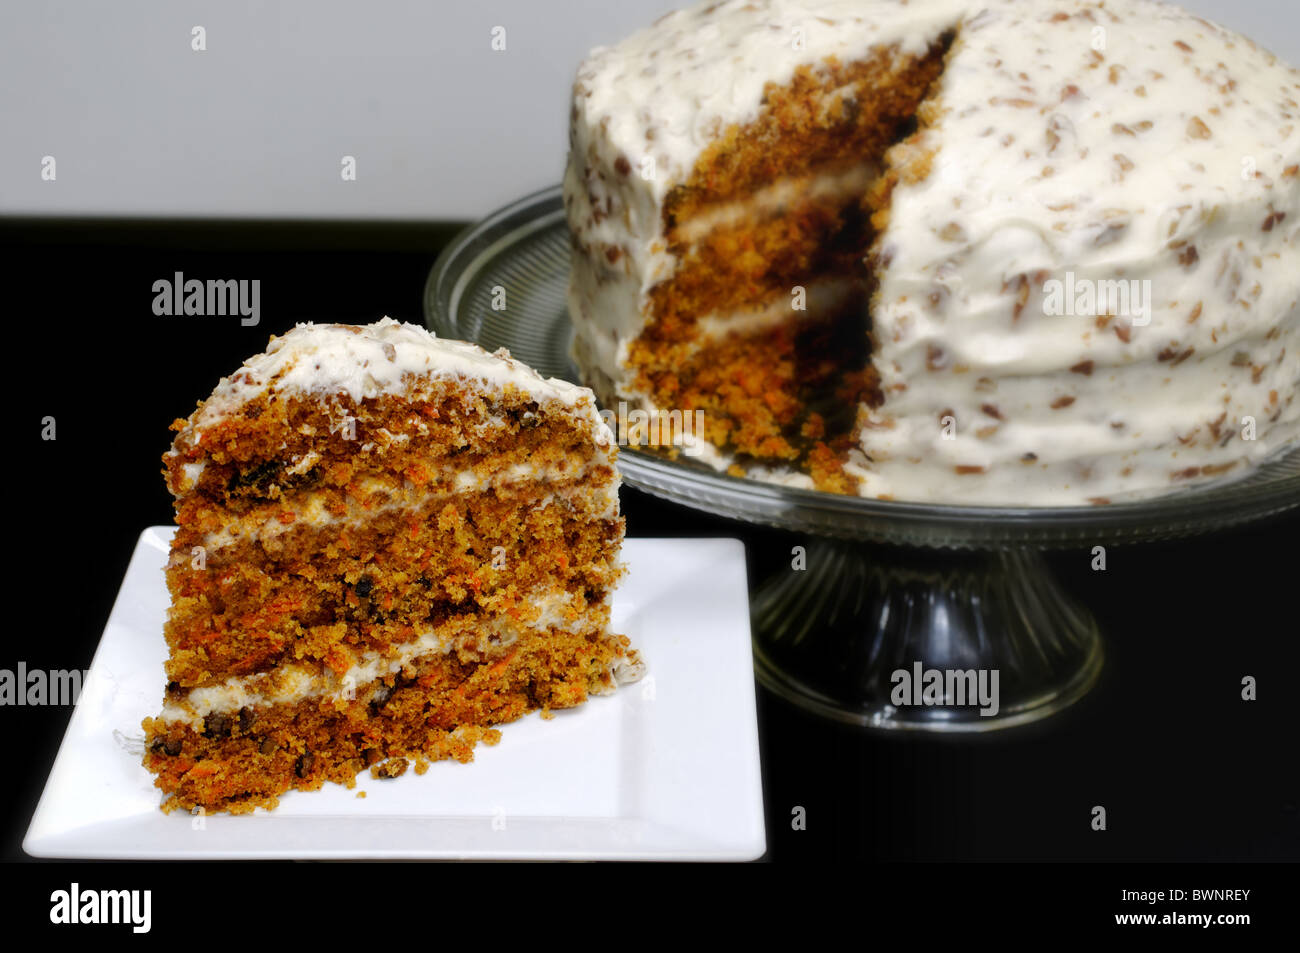 Slice of carrot cake with whole cake in background. Stock Photo